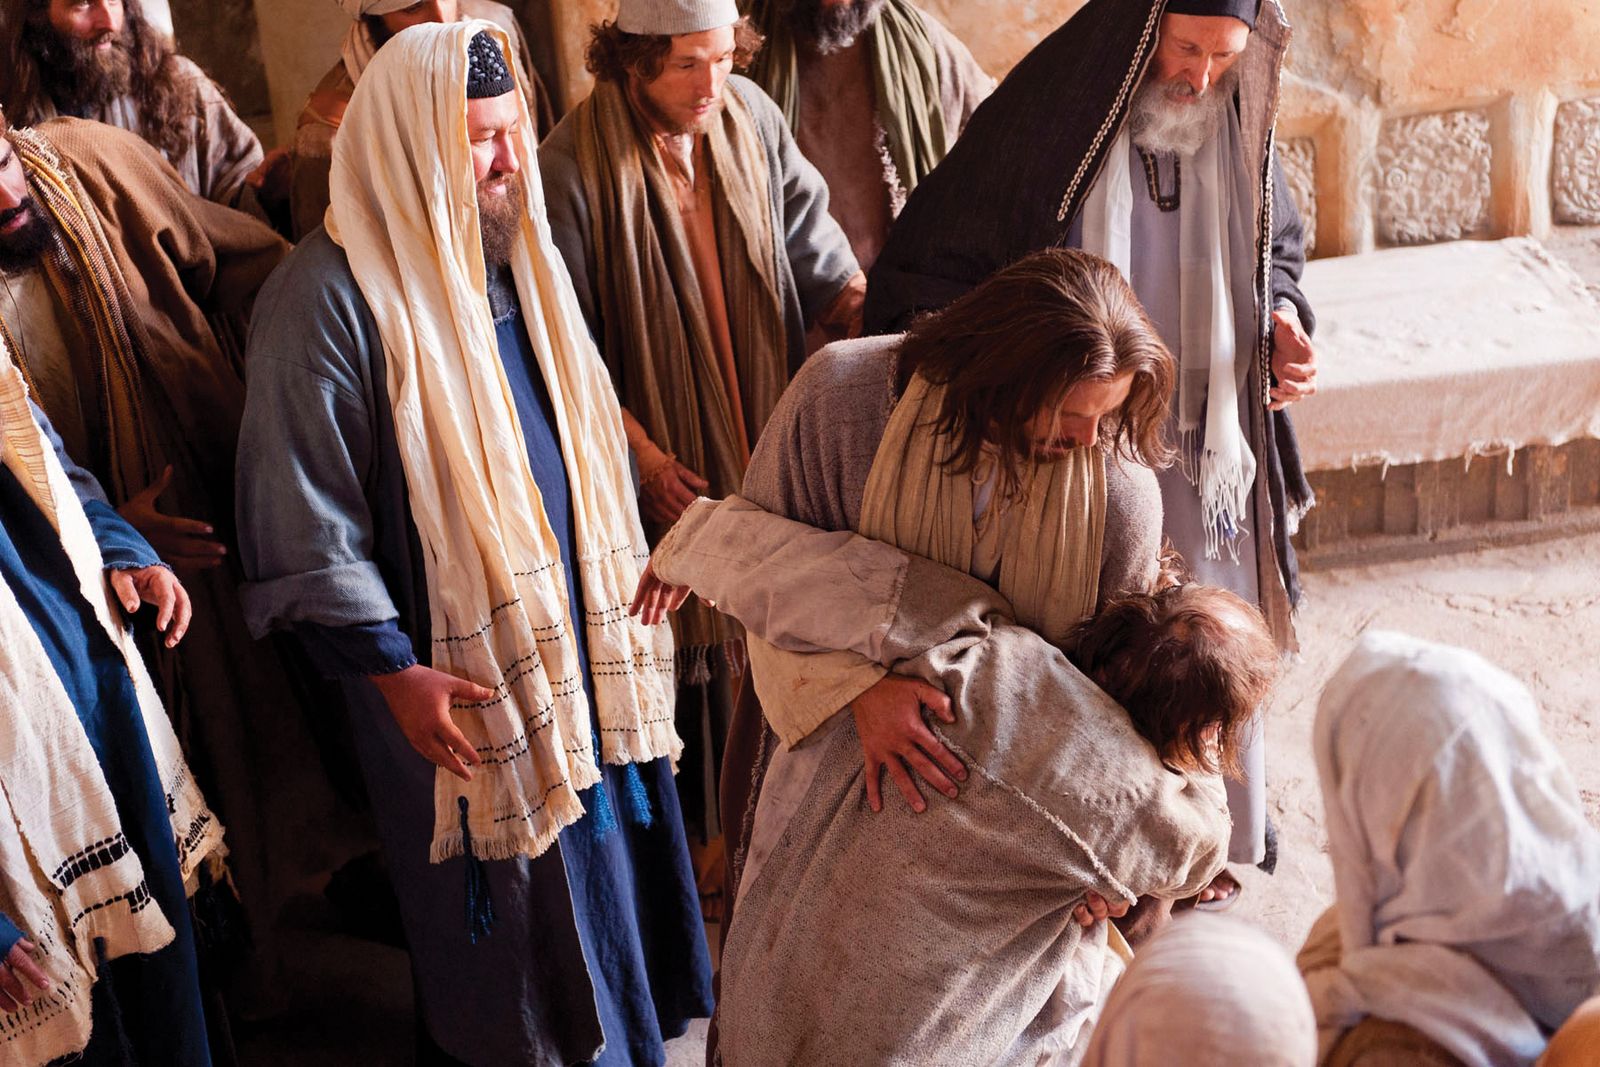 Jesus commands the unclean spirit to leave the man.